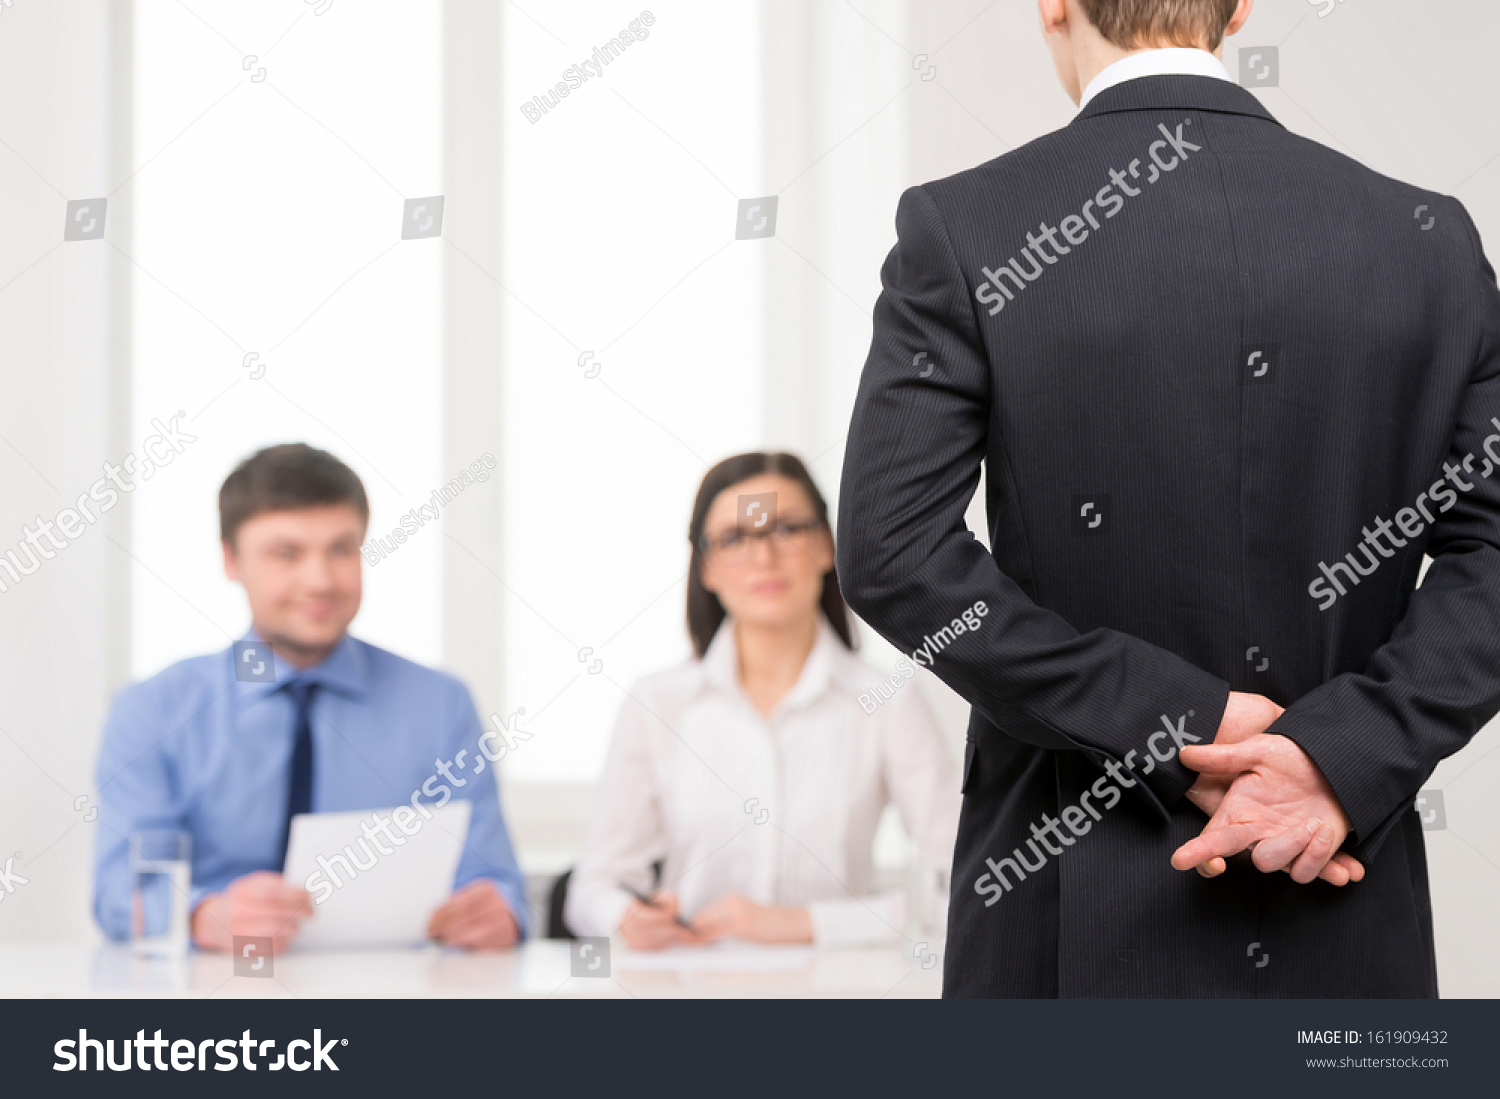 close man back fingers crossed behind stock photo